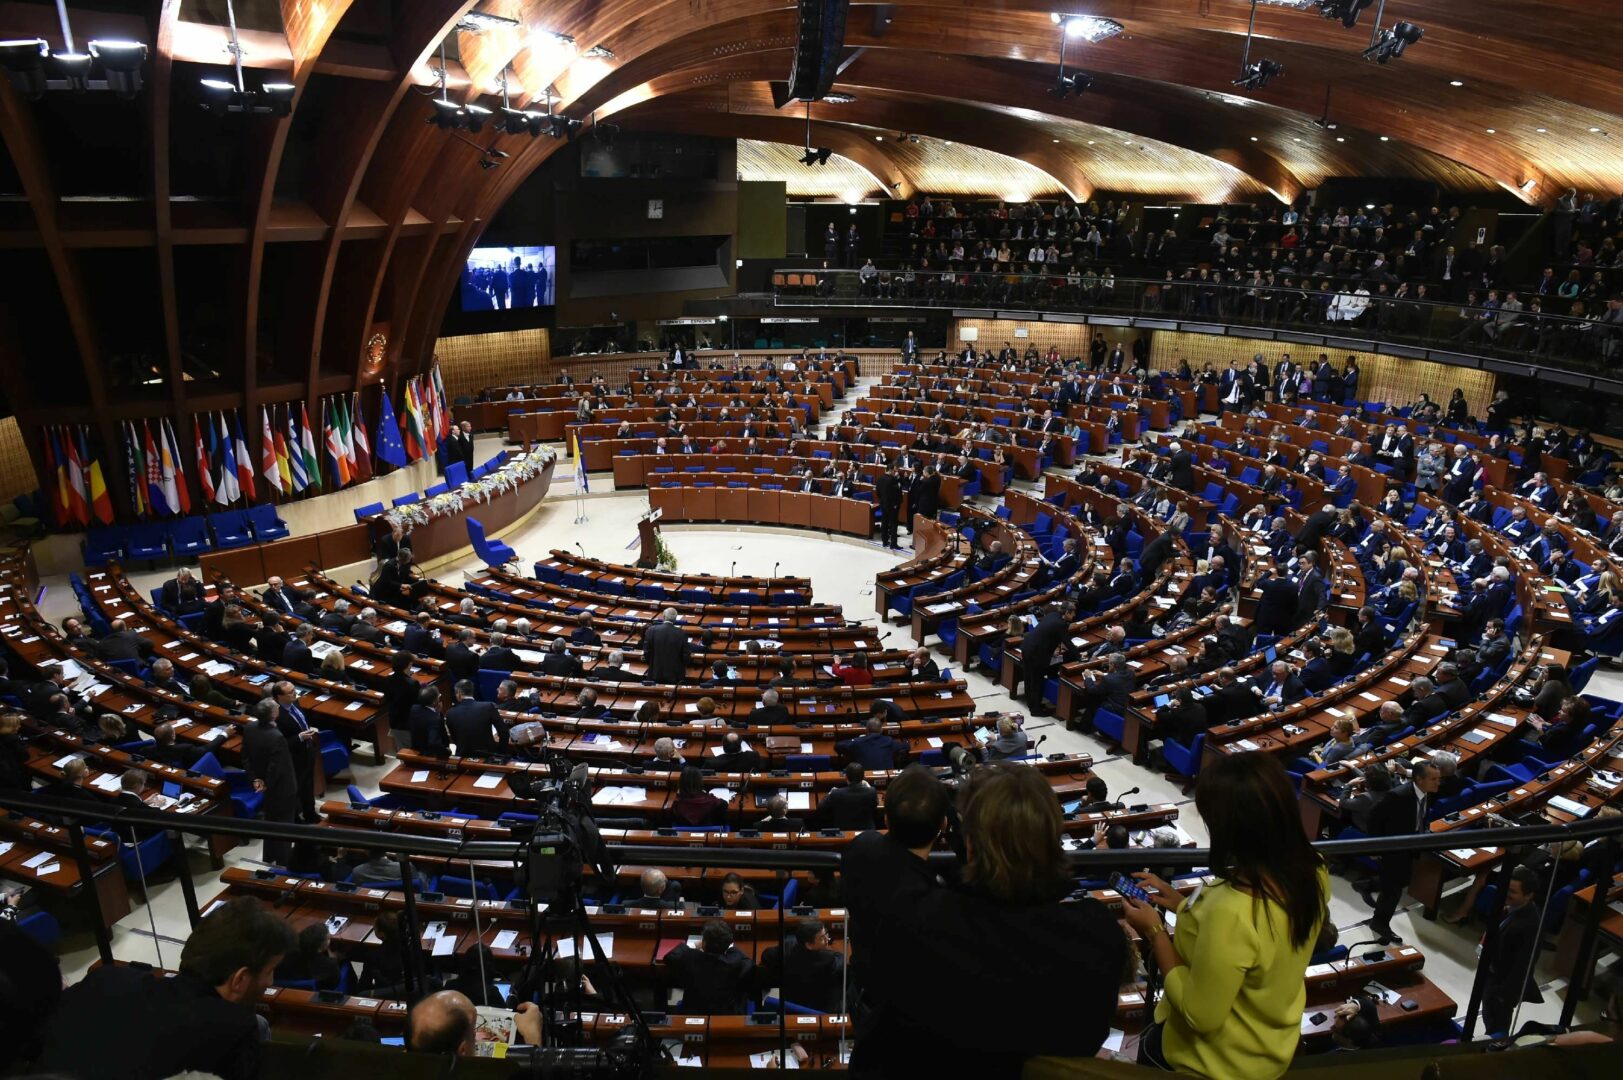 Council of Europe, vote on a resolution on Malta